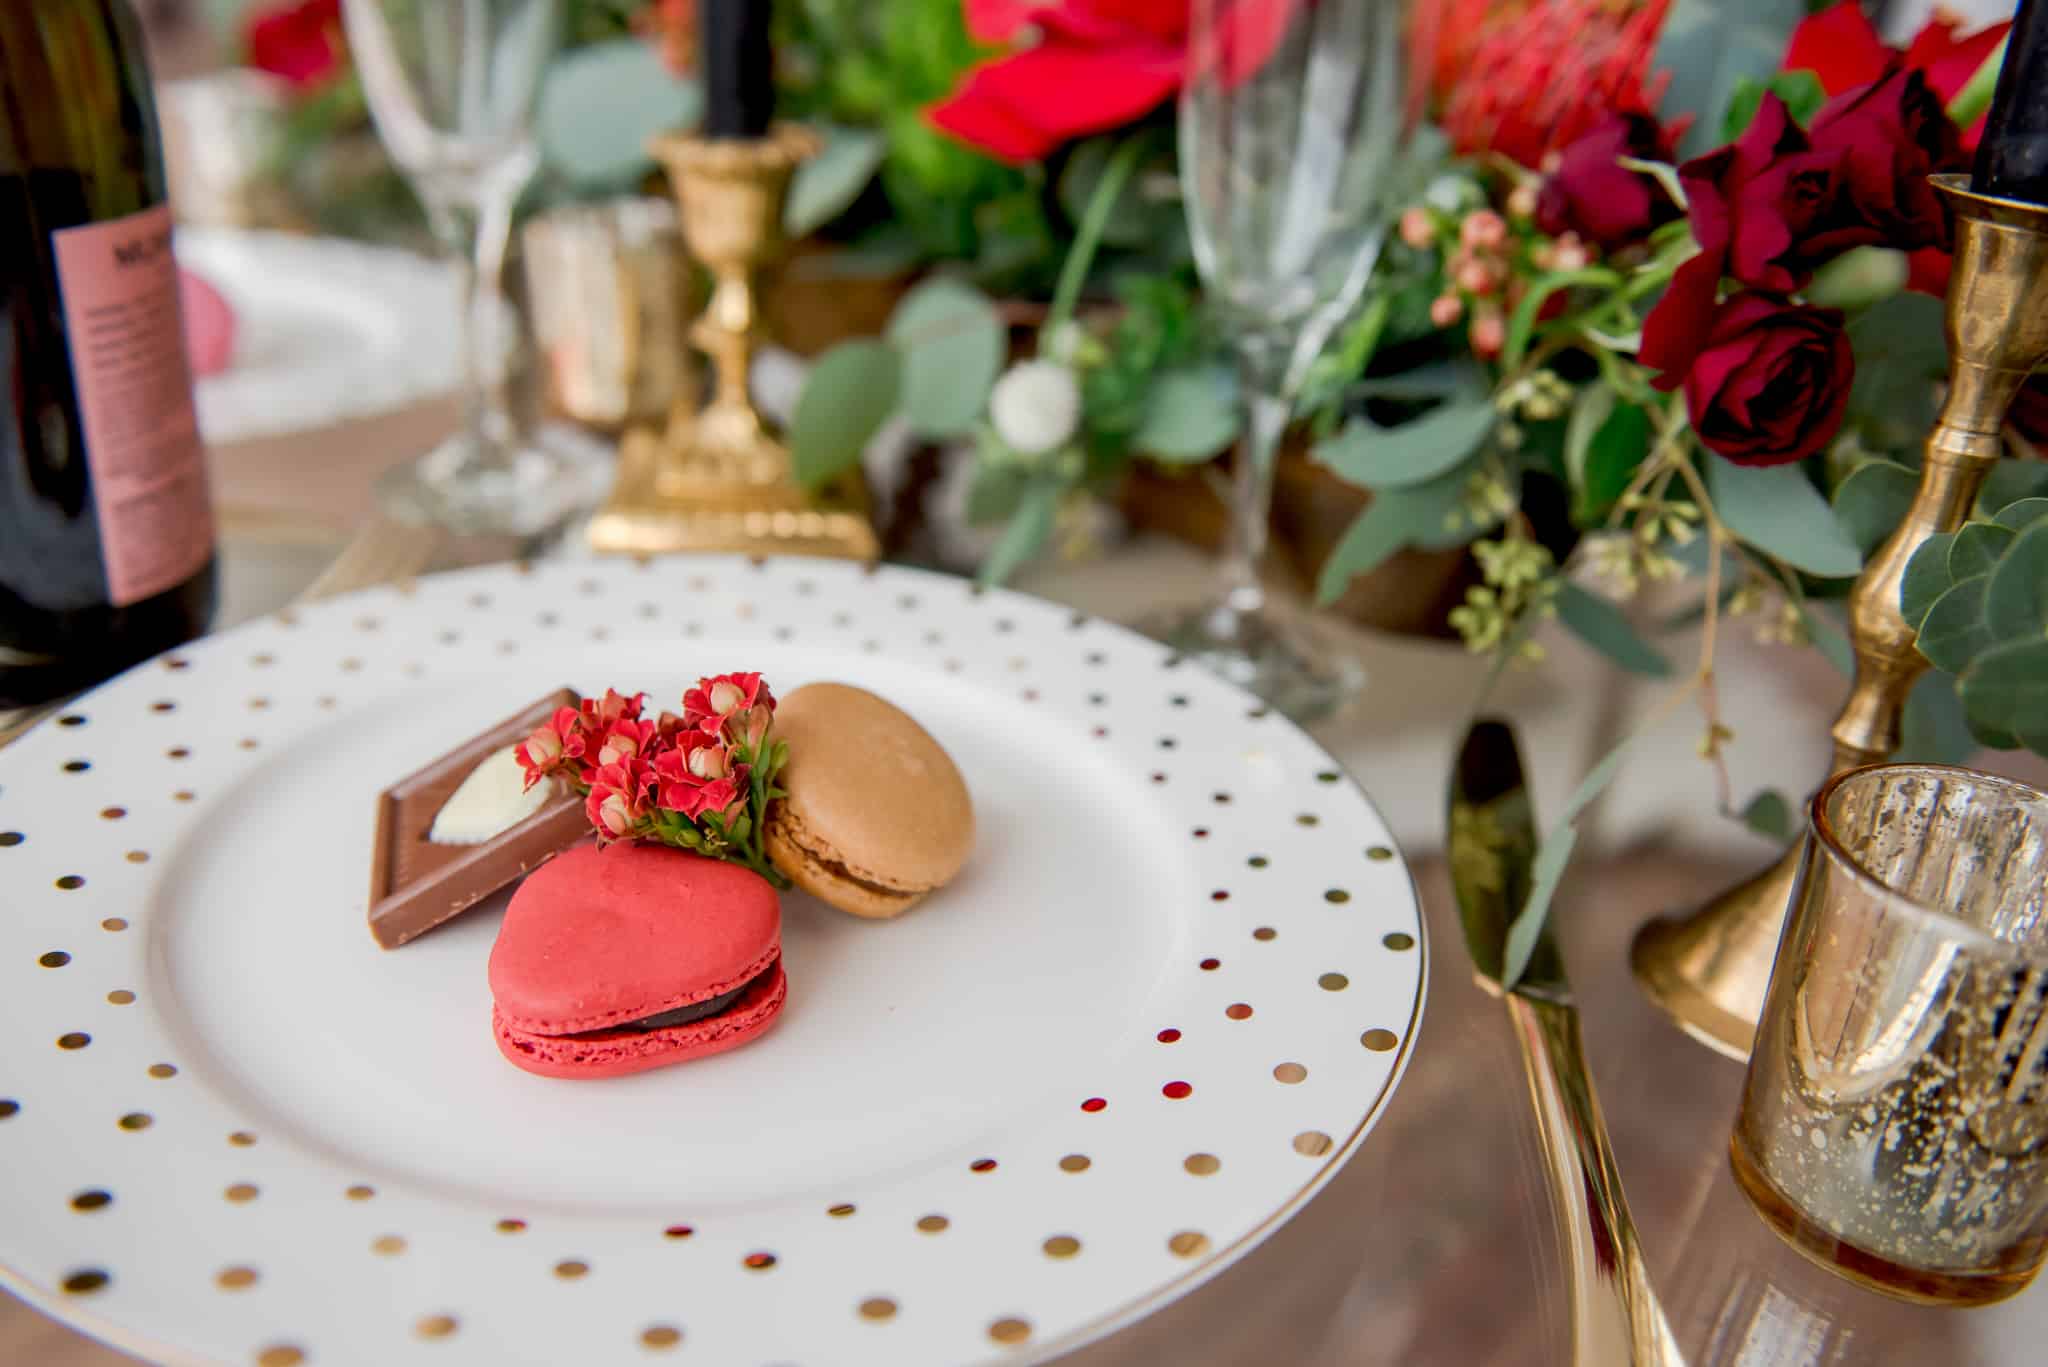 plate of two macarons and a piece of chocolate on a white and gold polka dot plate.